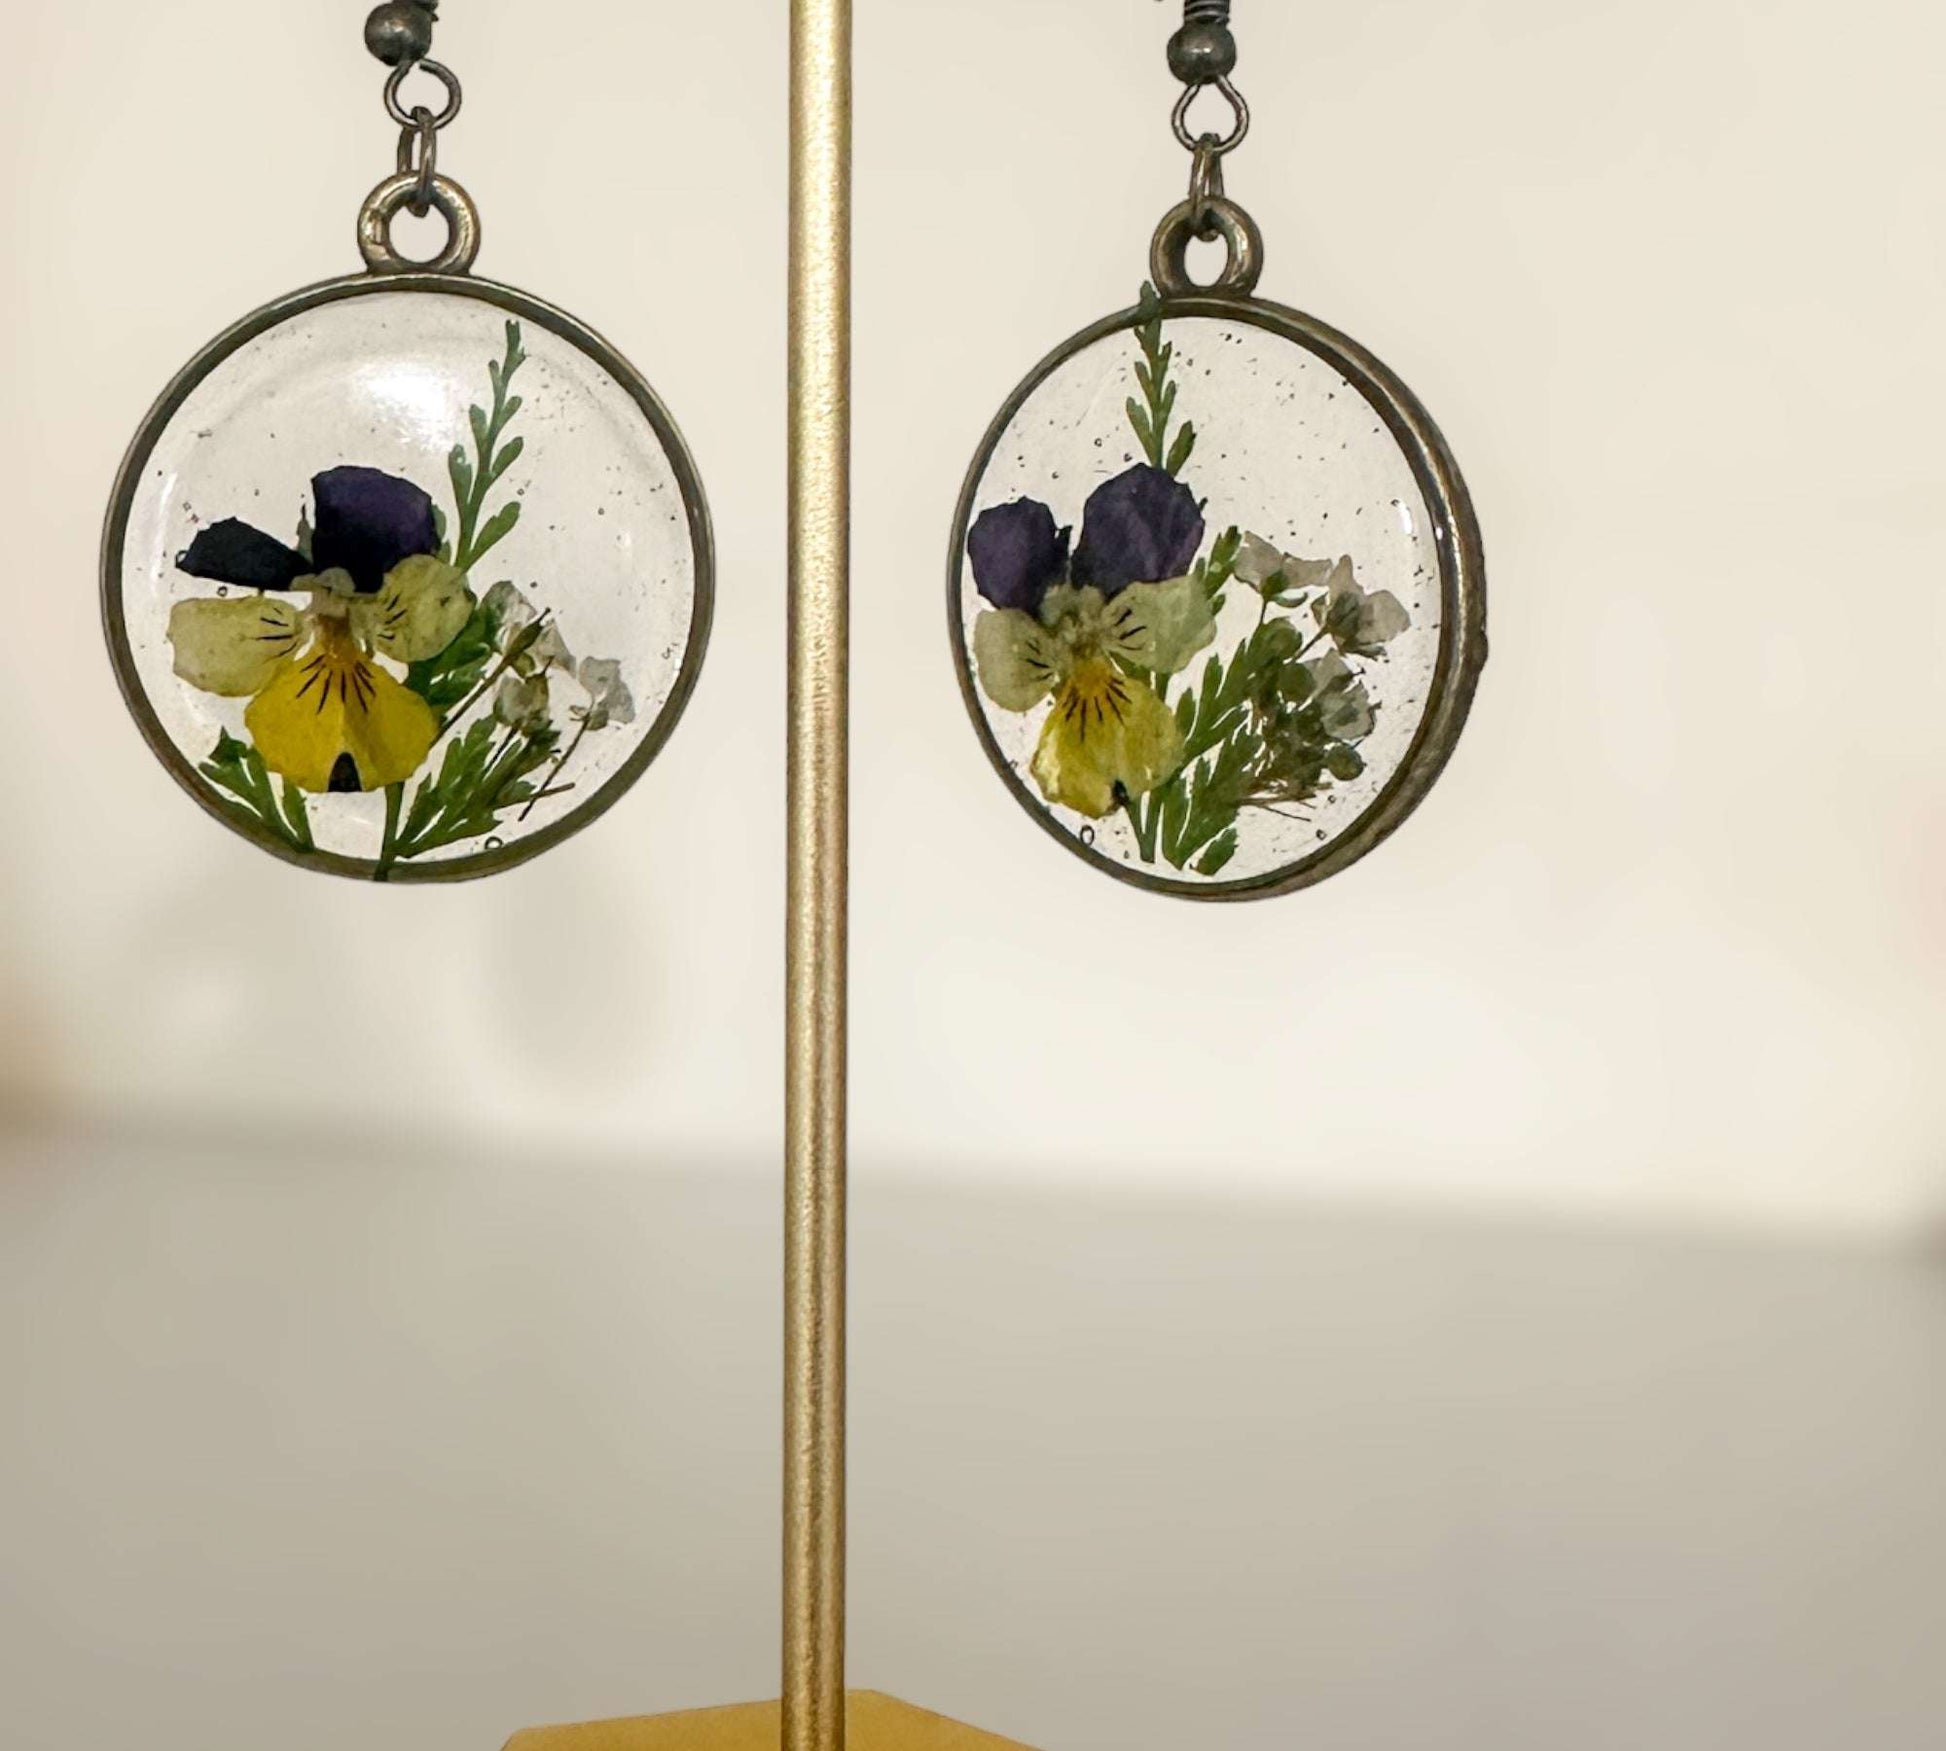 Pansy Earrings: Nature Inspired - Real Fern and Delicate Flowers 